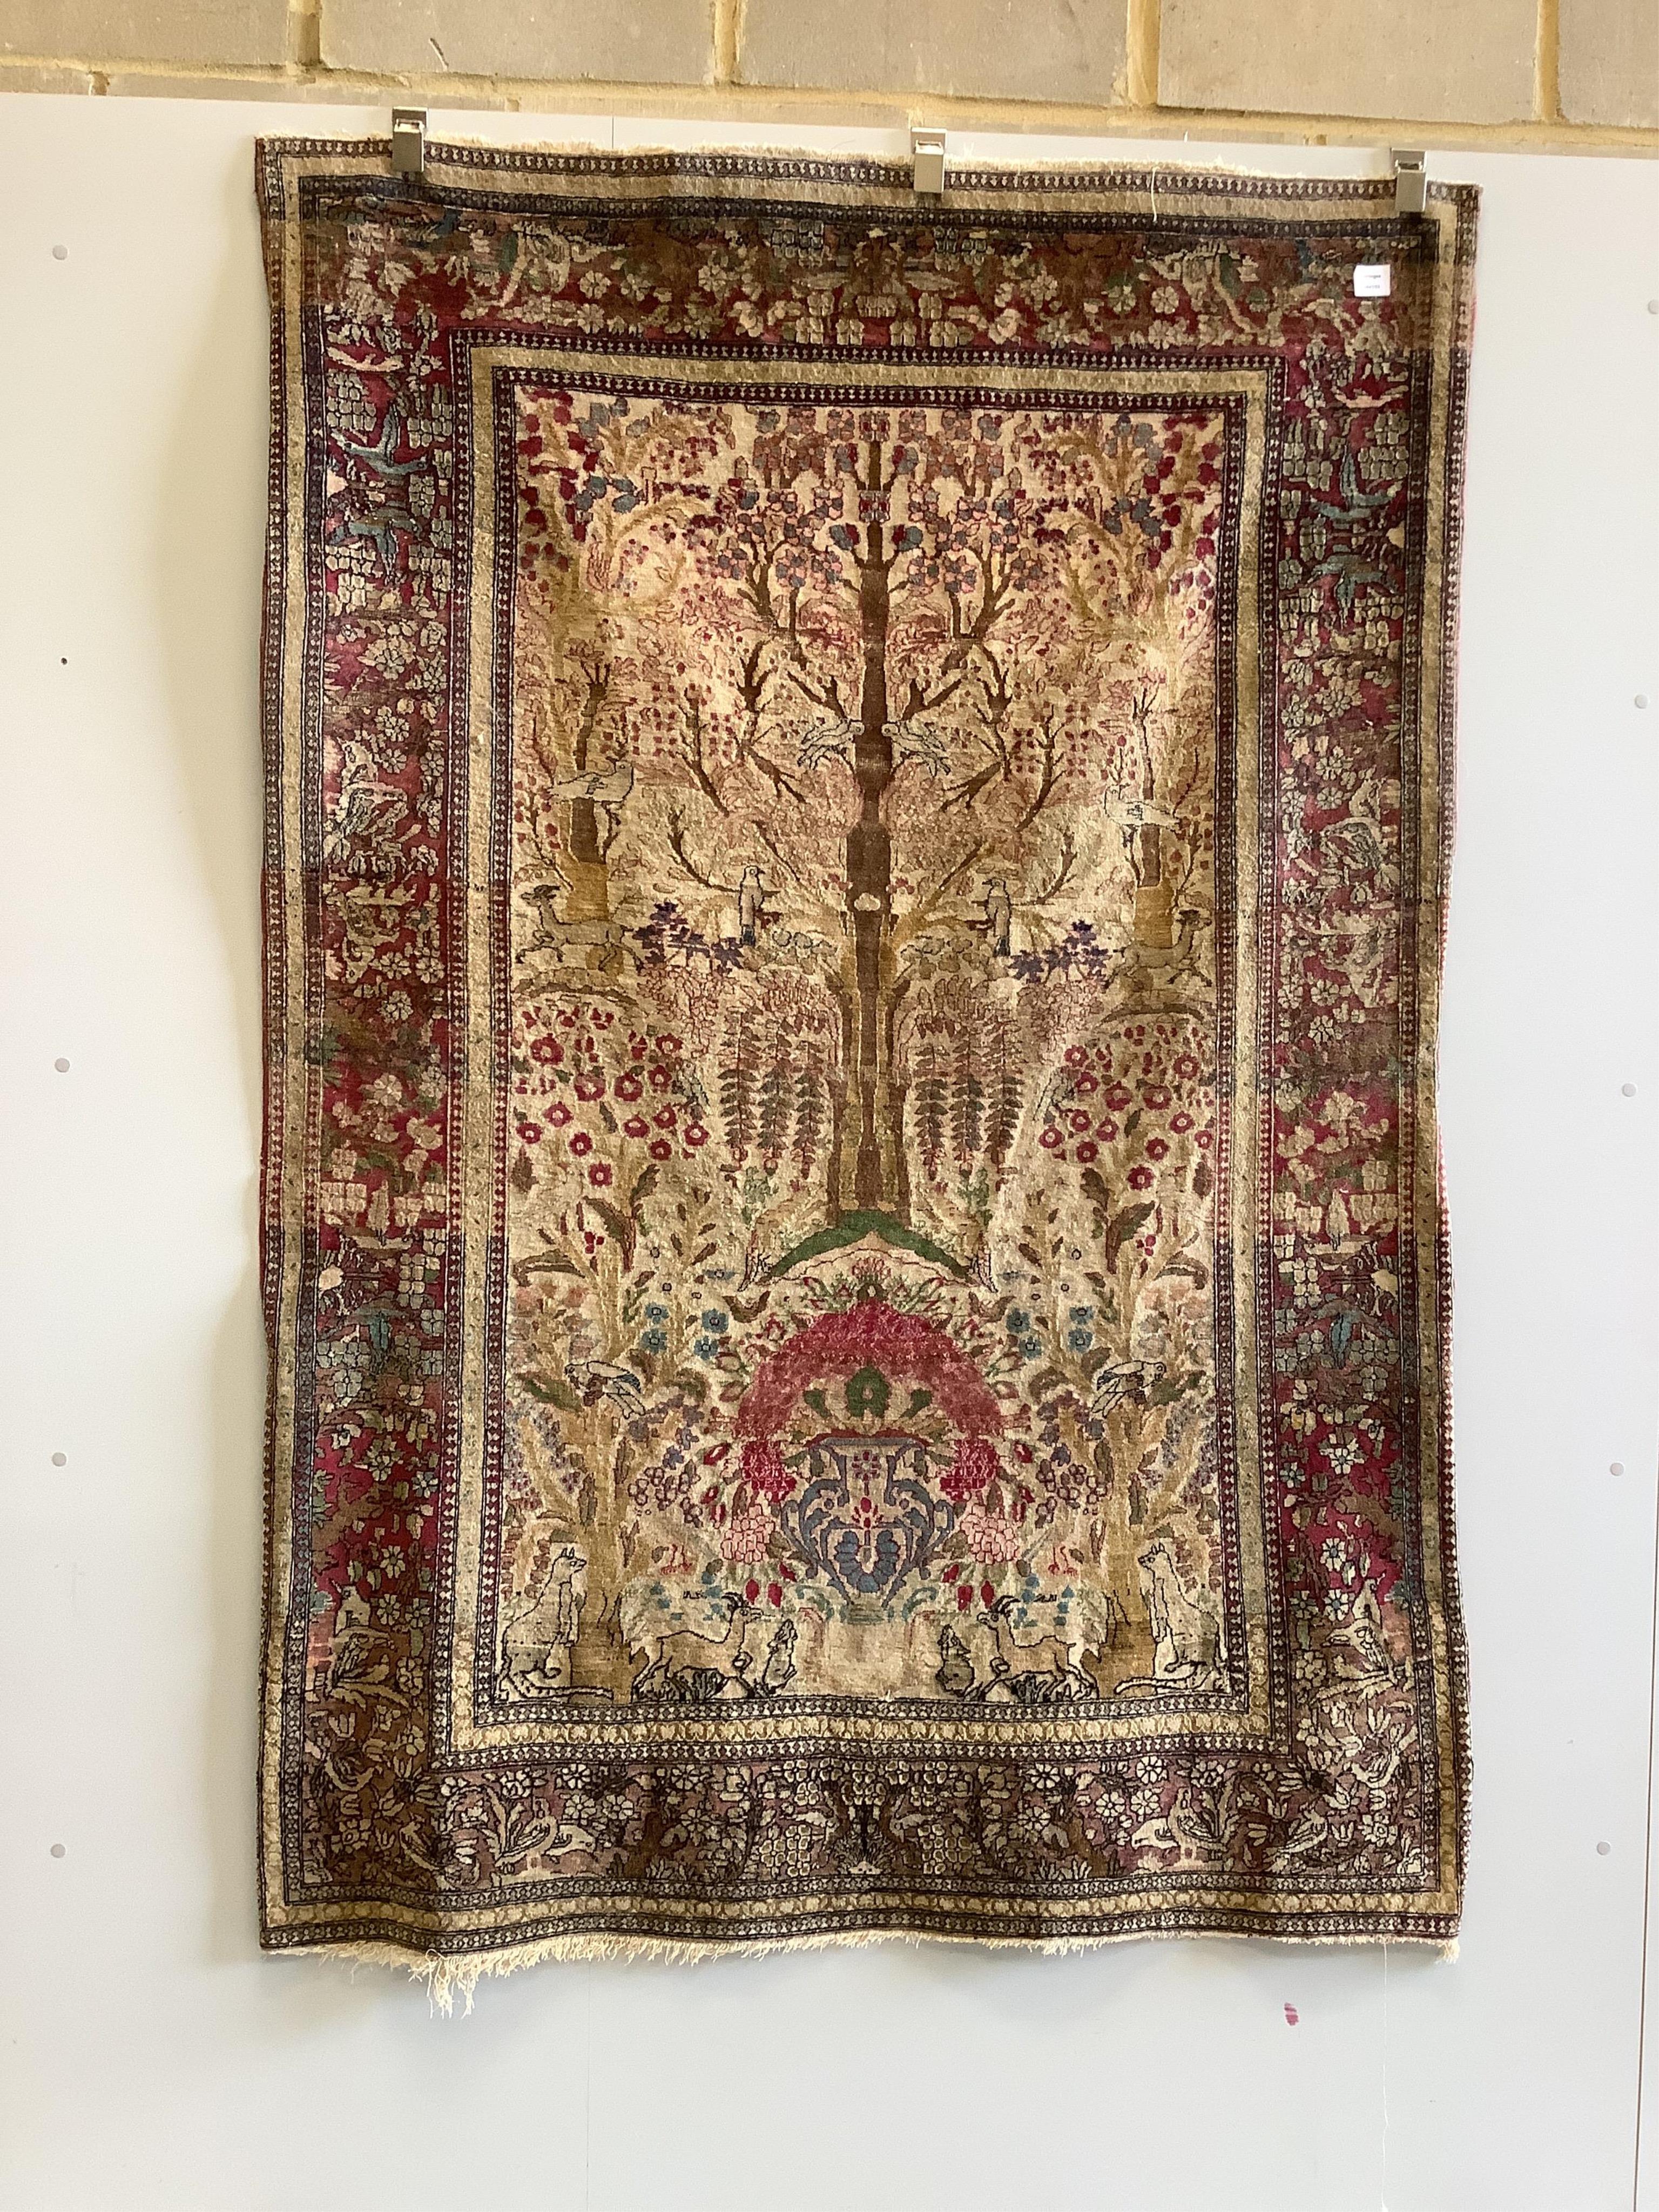 An antique Isphahan garden design ivory ground rug, approximately 200 x 130cm. Condition - fair